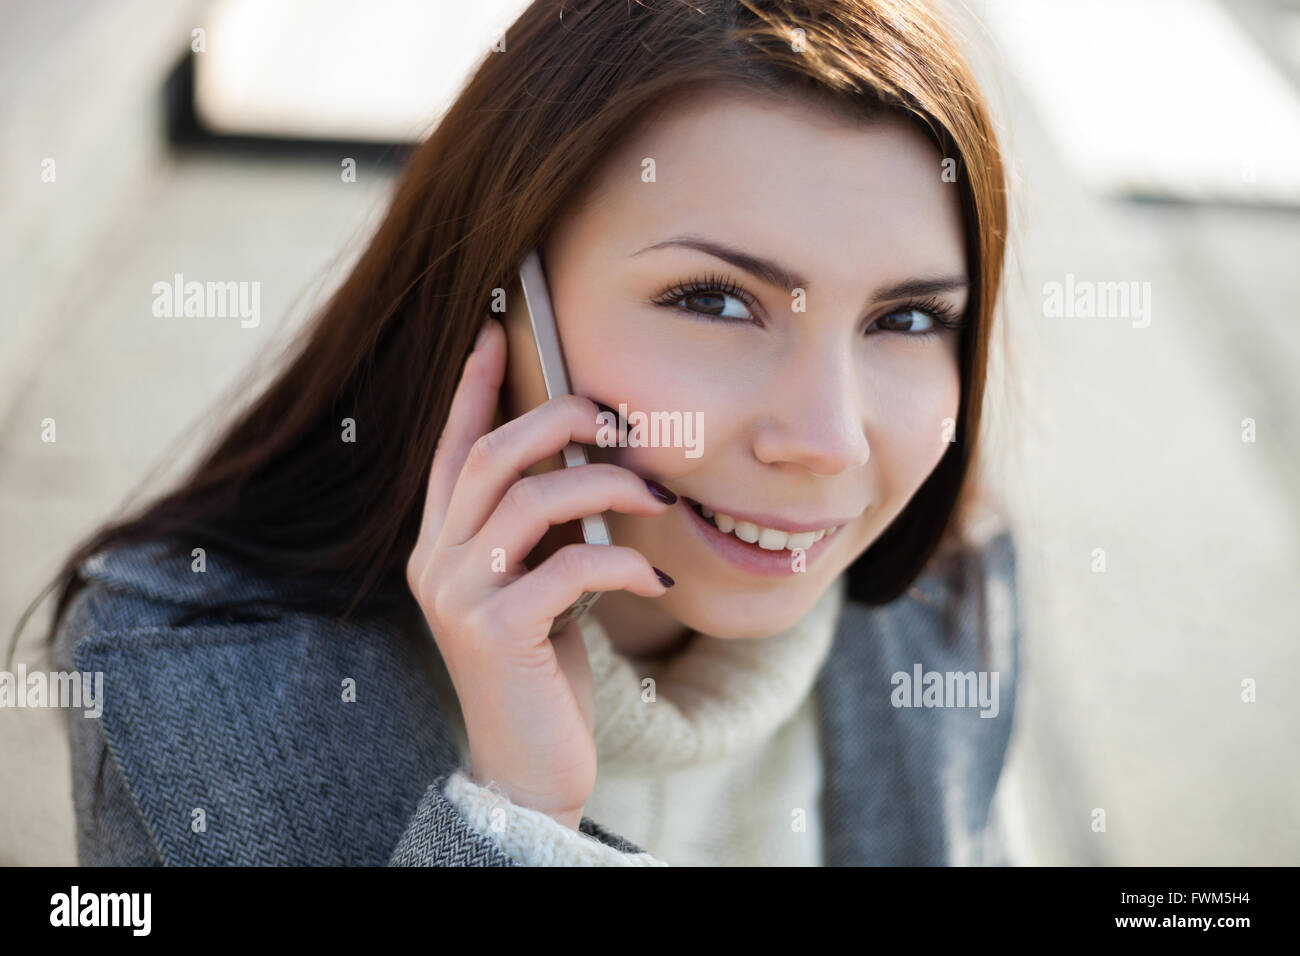 Cute young girl with pug nose talking on the phone at bright spring day outdoors. The model is beautiful and the smart phone is modern Stock Photo